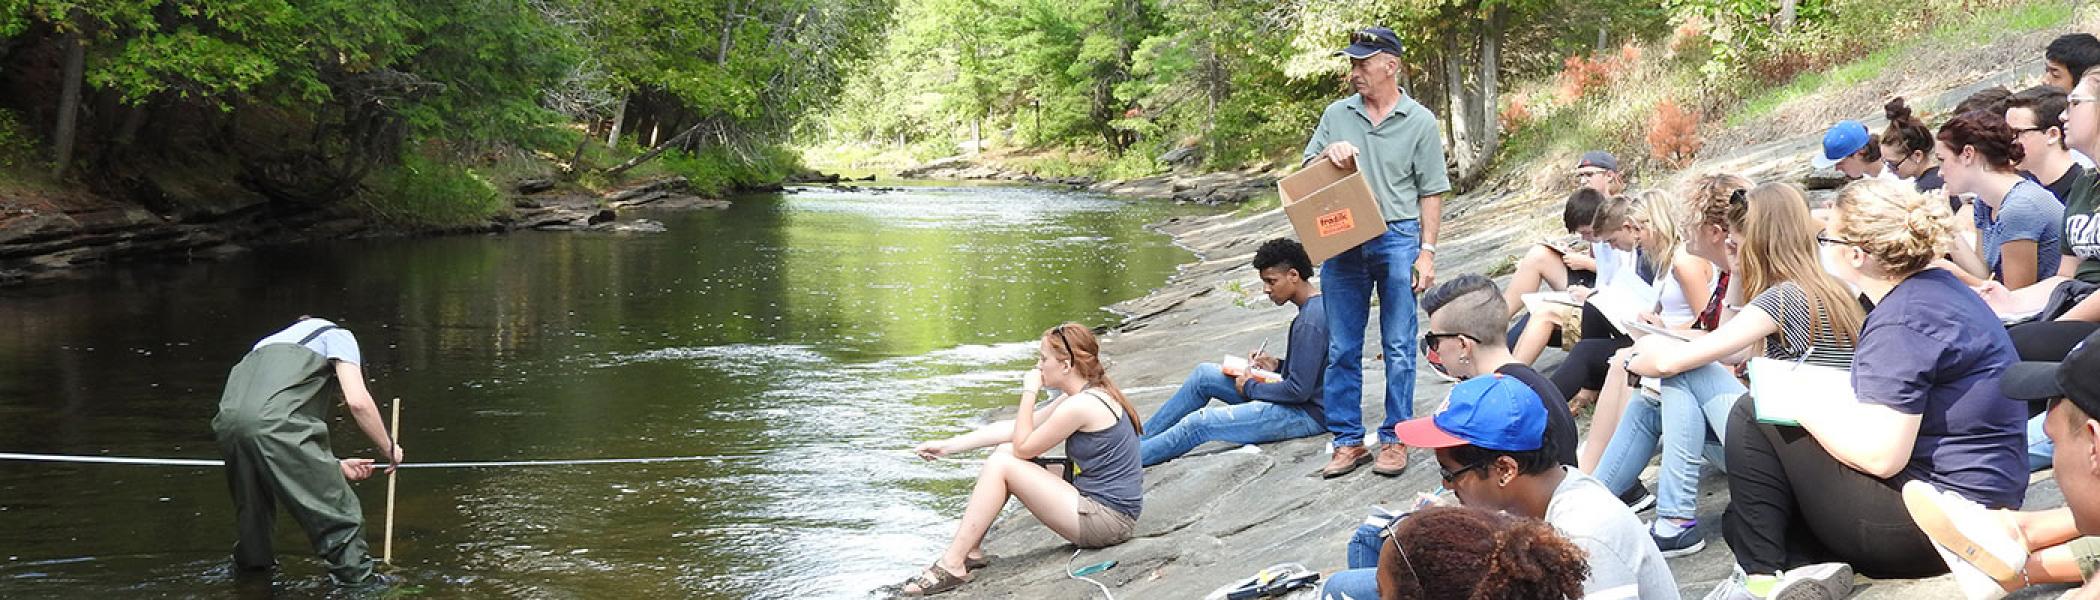 Student working on experiment in river while other students watch